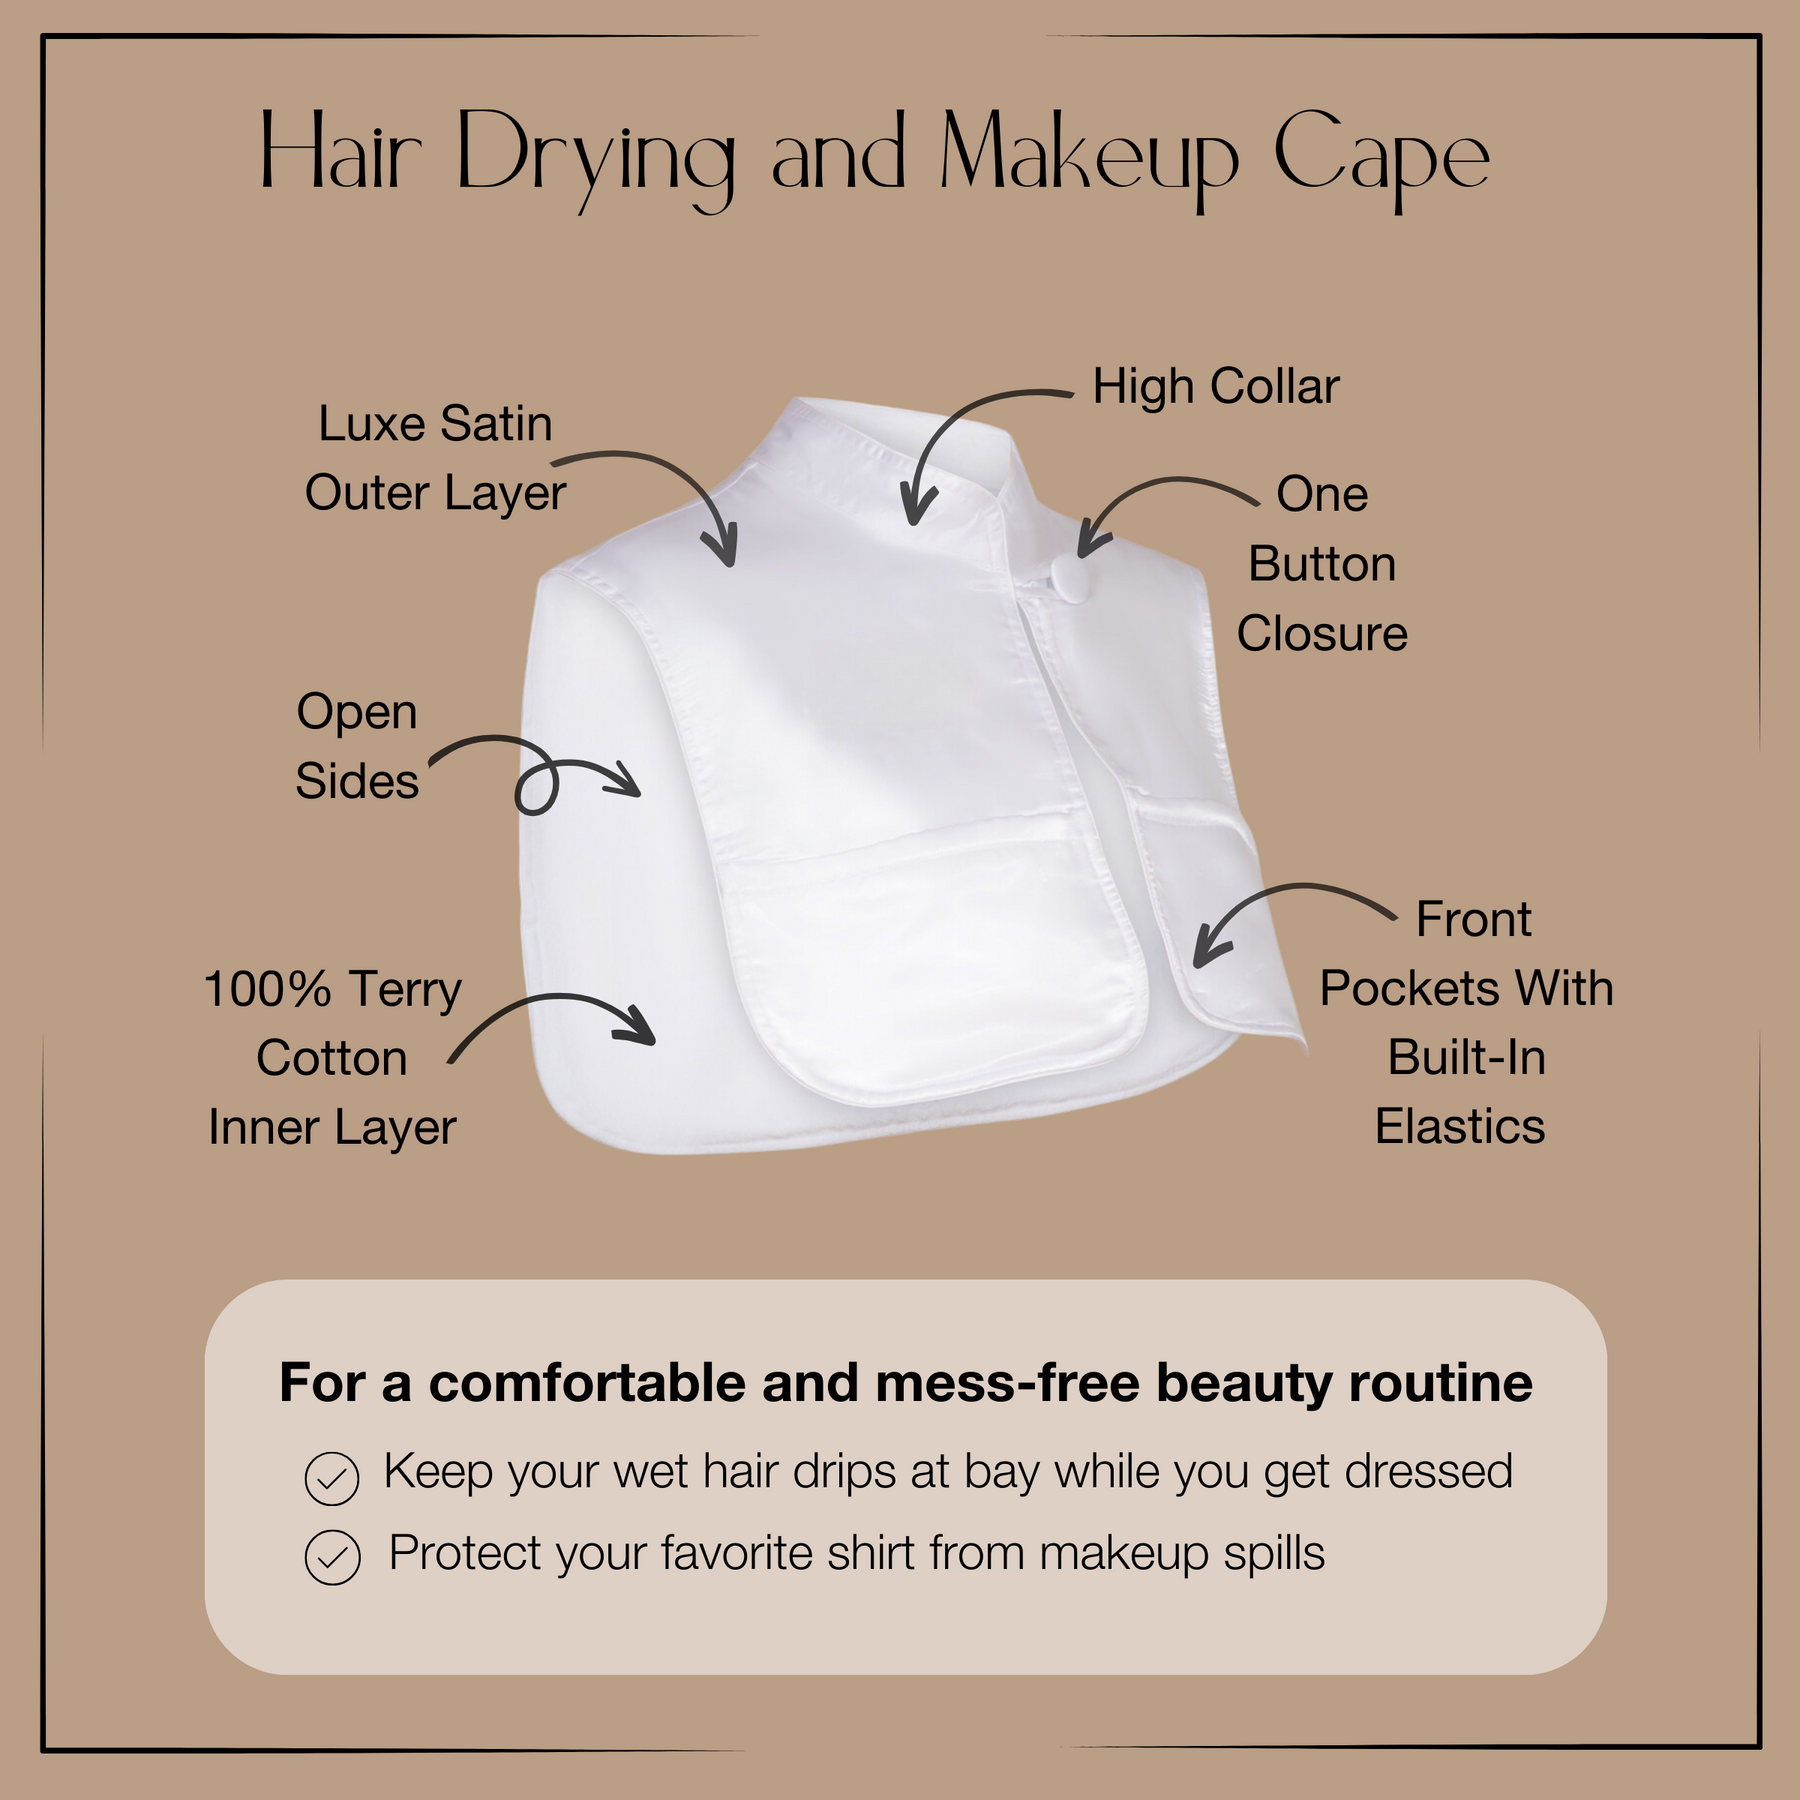 Monii Hair Drying and Makeup Cape, White Satin